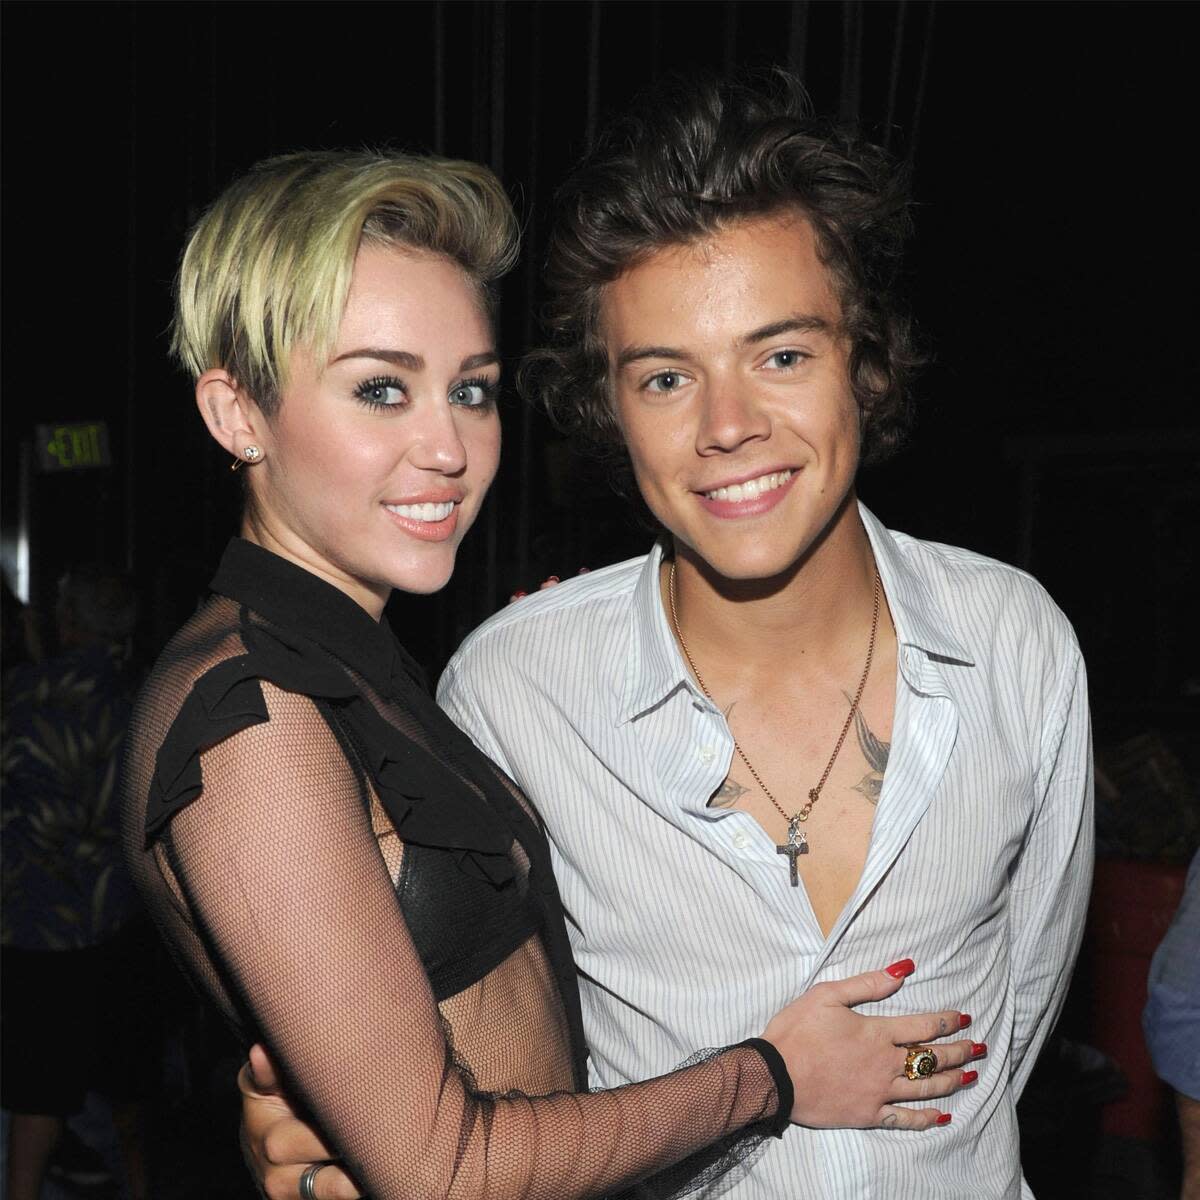 Miley Cyrus shoots her recording with Harry Styles and fantasises about ‘sharing a life together’